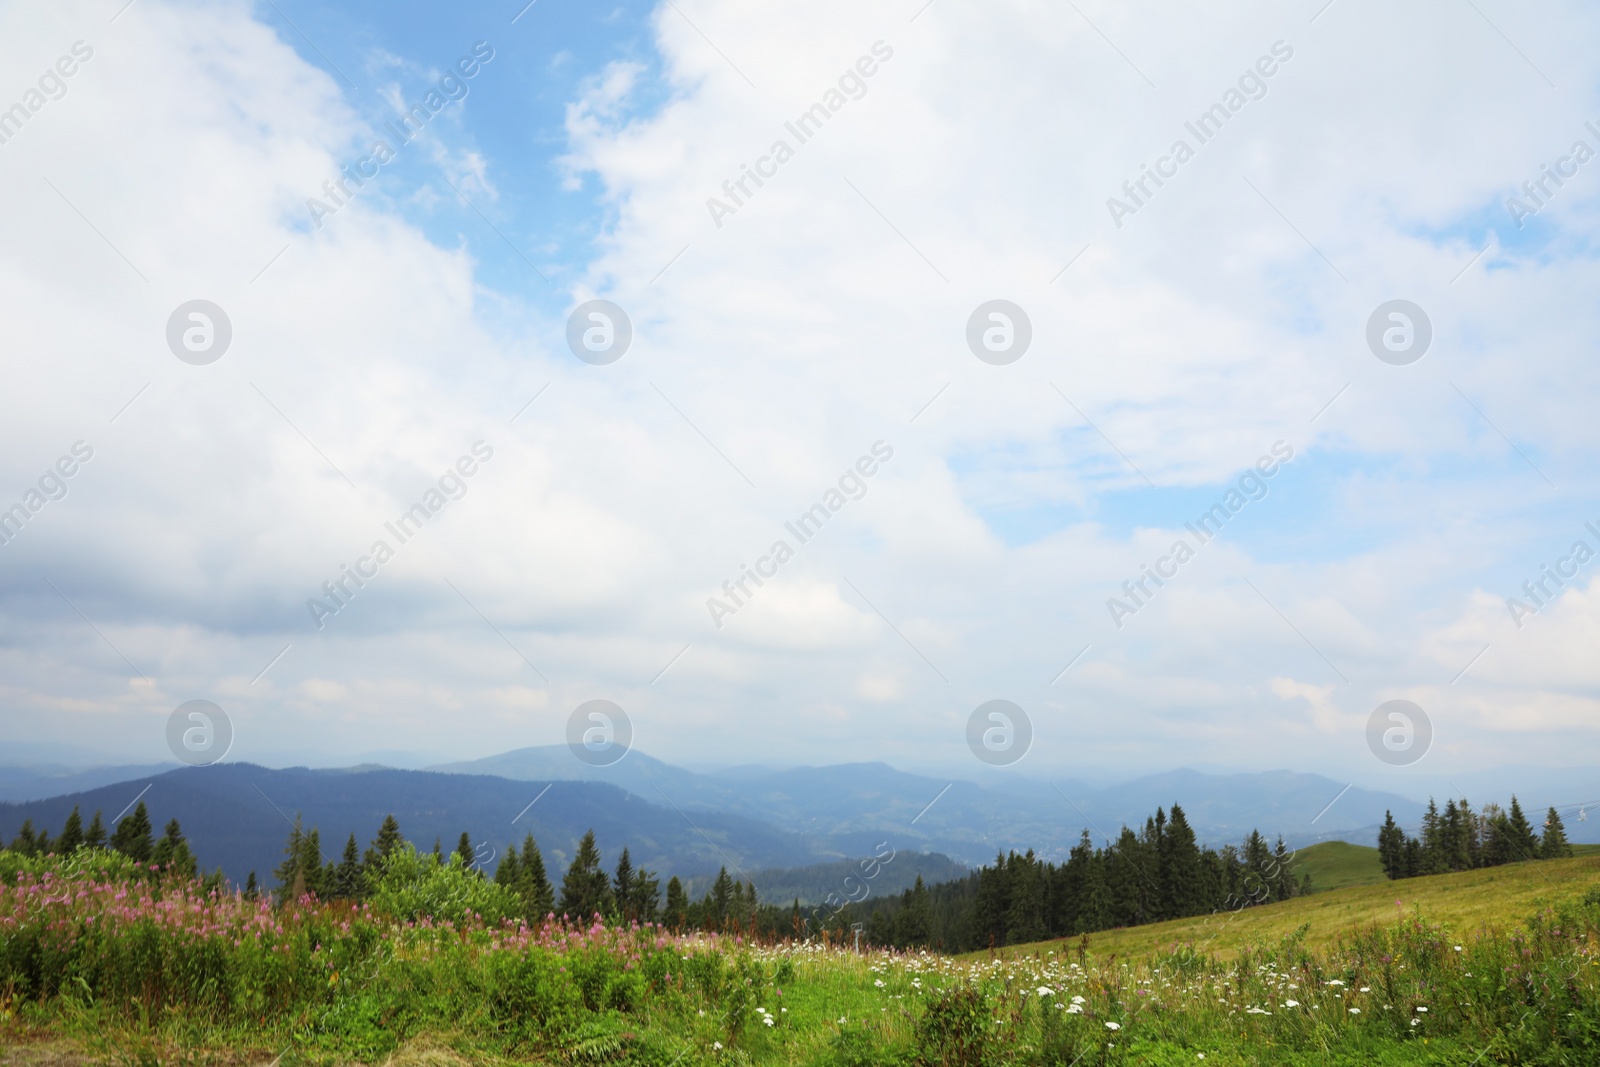 Photo of Picturesque landscape with mountain meadow